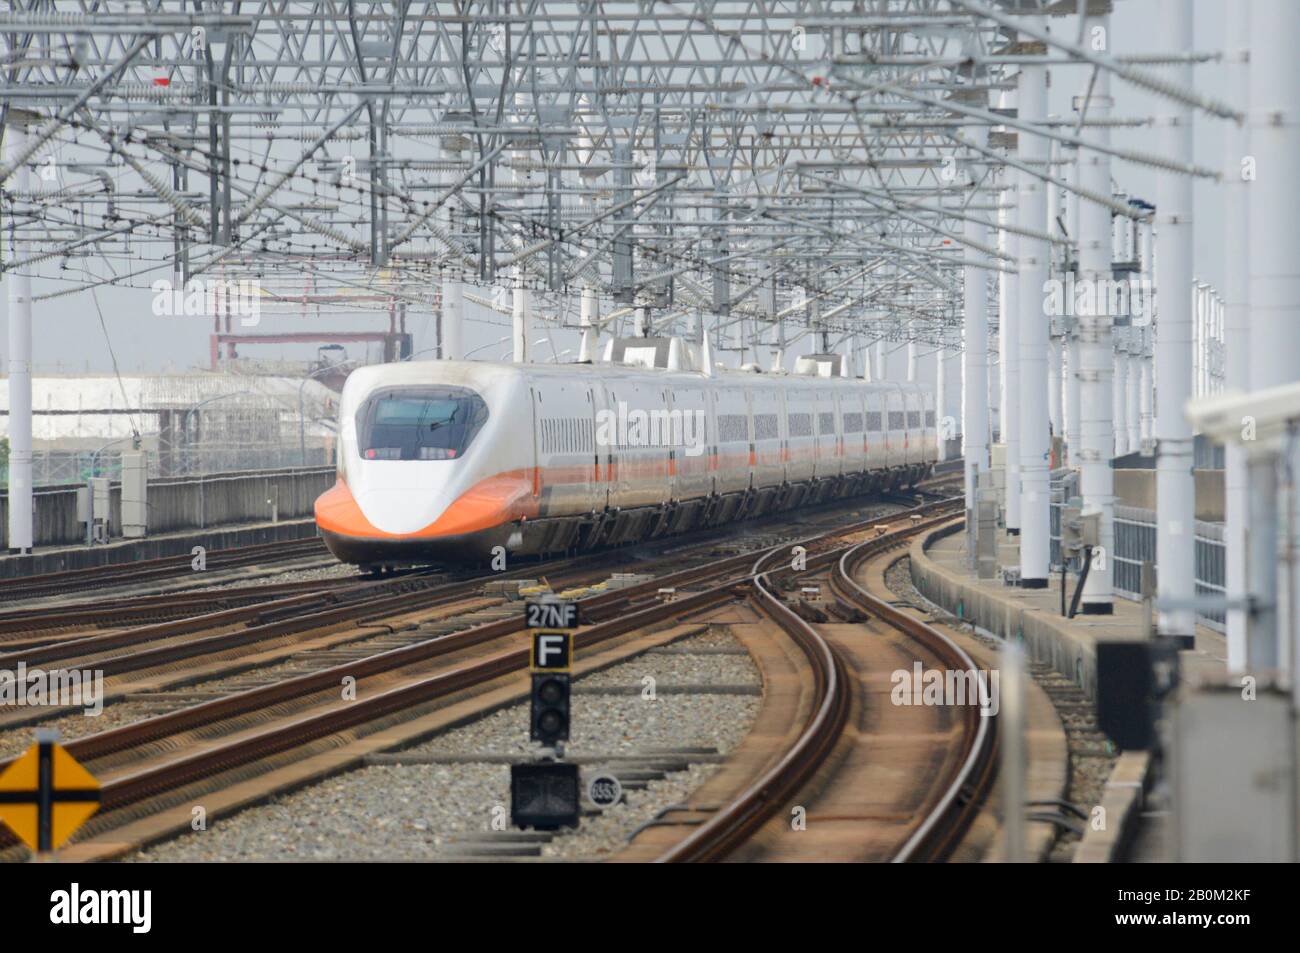 A High speed bullet train leaves Tainan HSR station, Taiwan Stock Photo